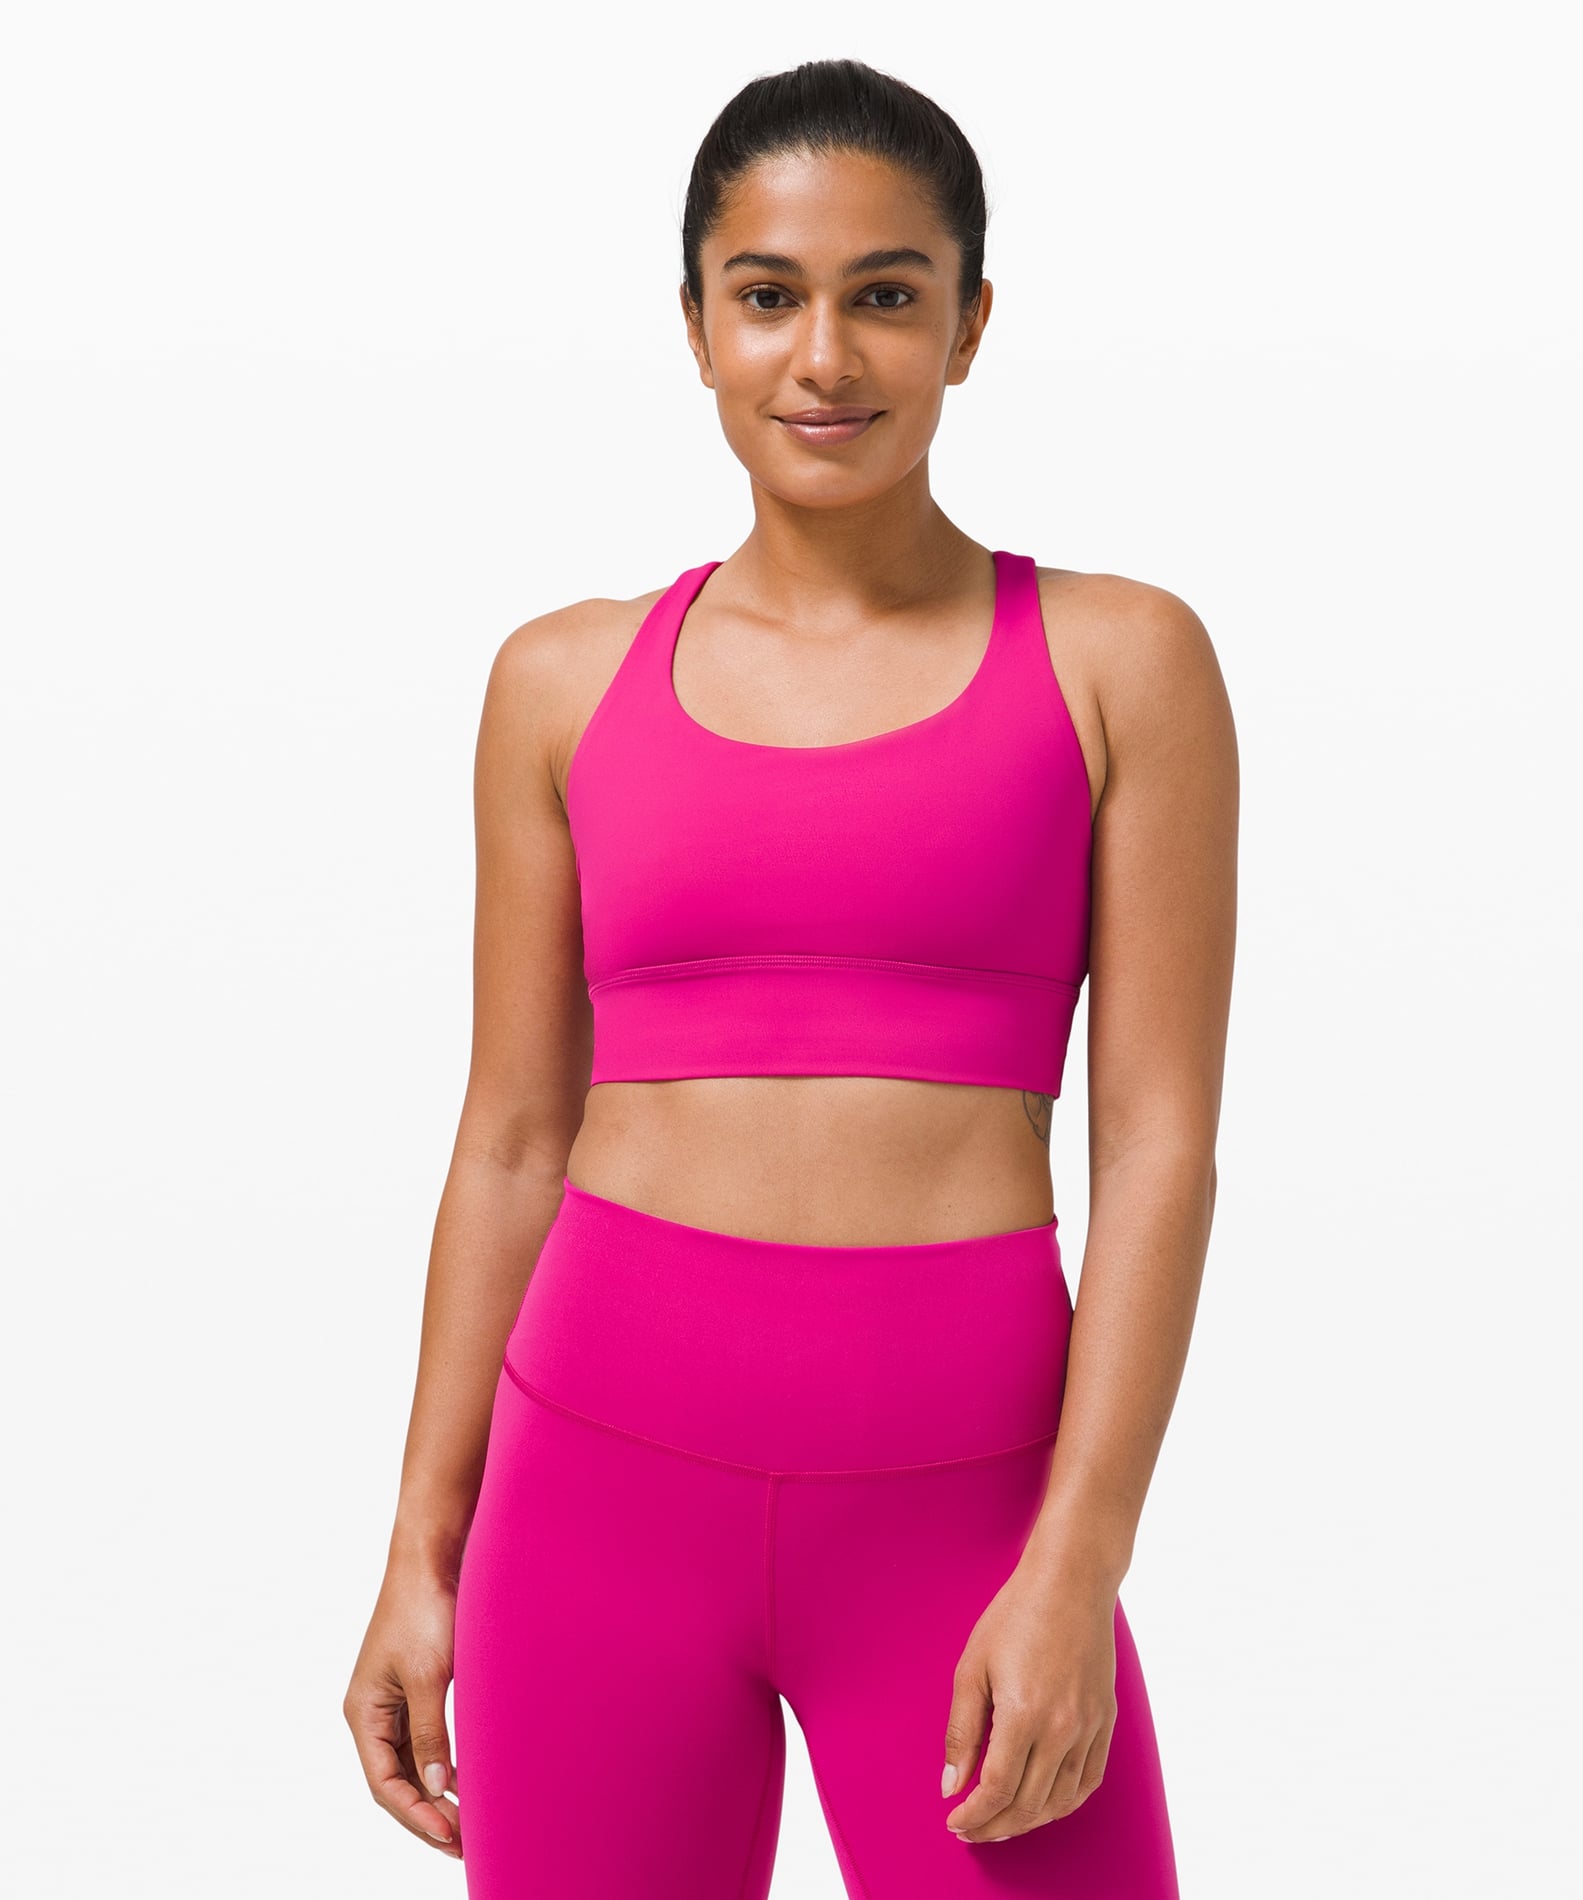 Best Matching Sets at Lululemon For Working Out and Lounging | POPSUGAR ...